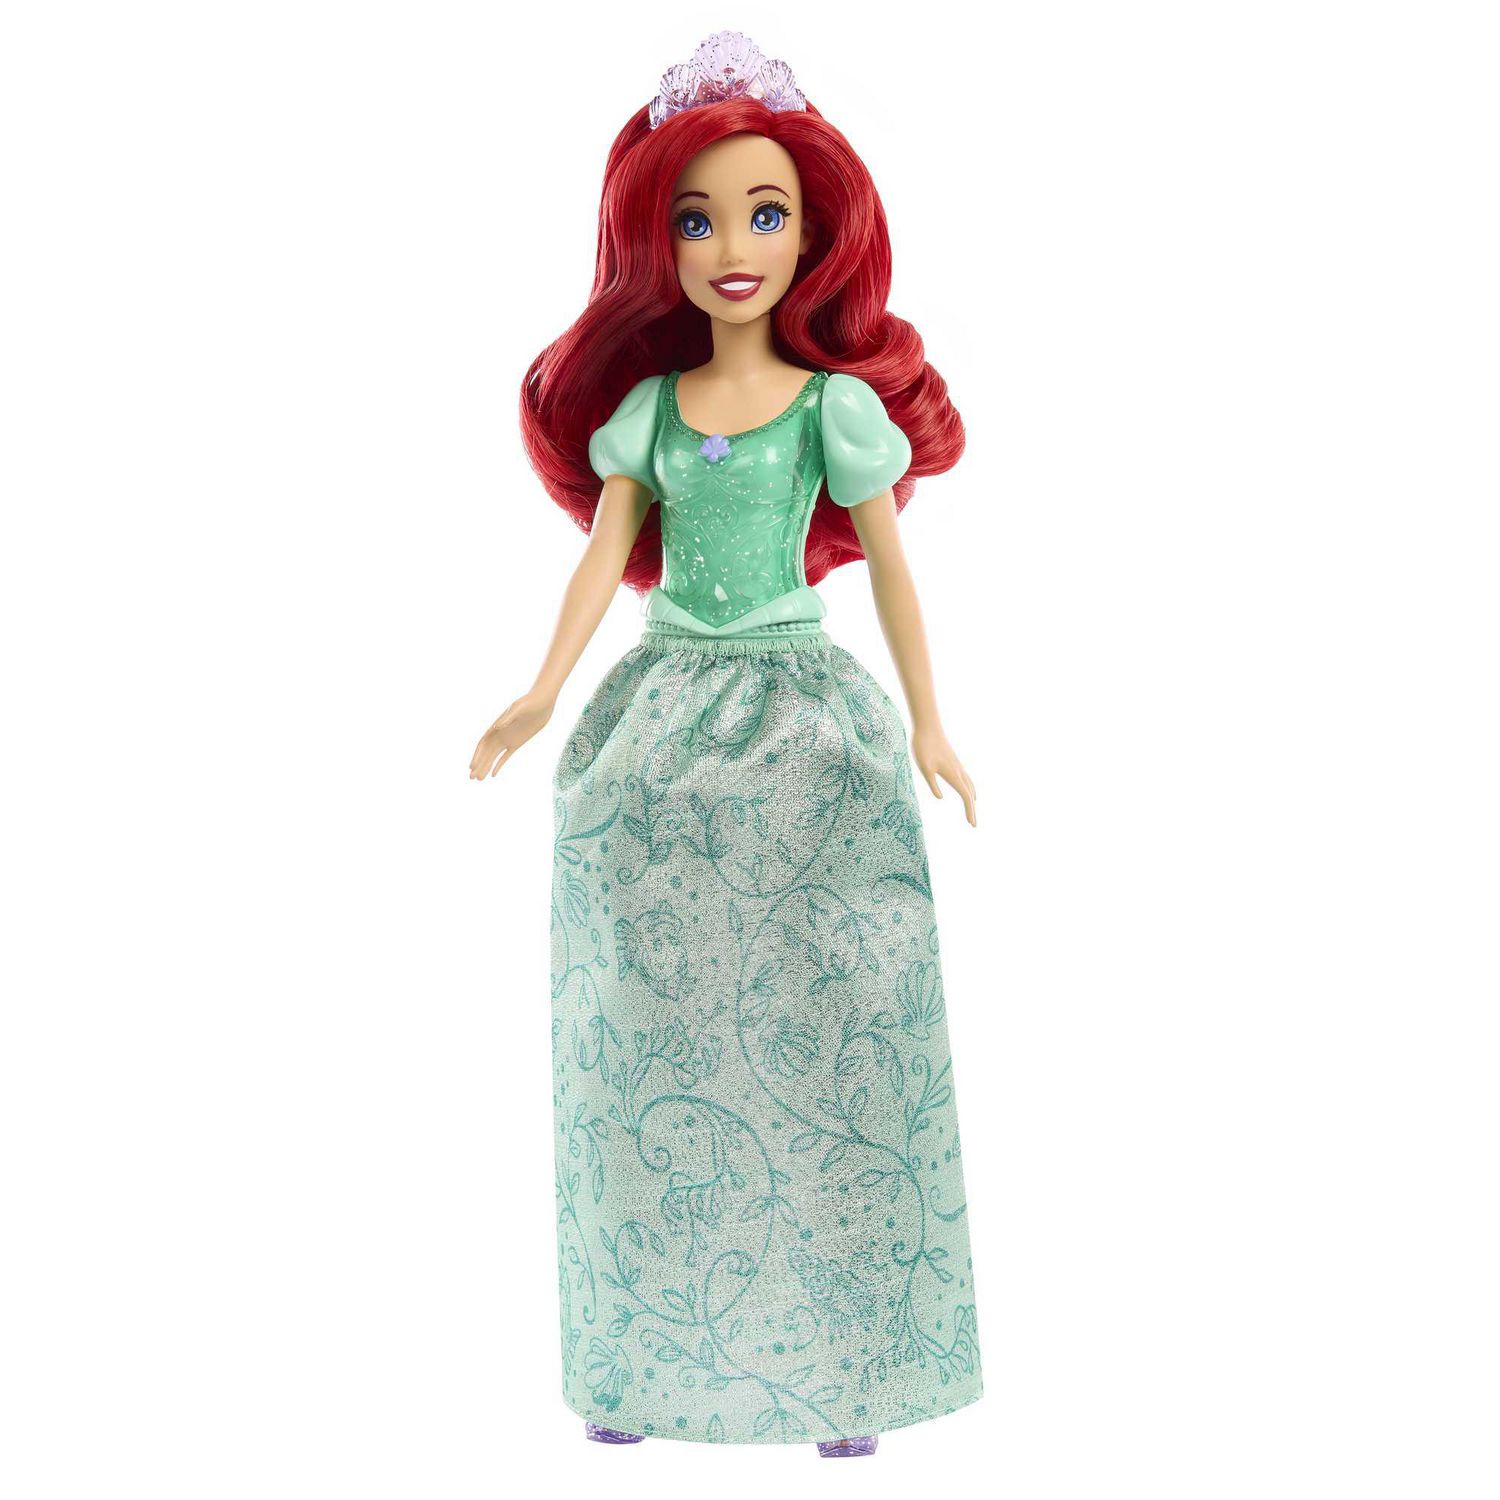 Disney Princess Ariel Fashion Doll and Accessory Toy, Inspired by